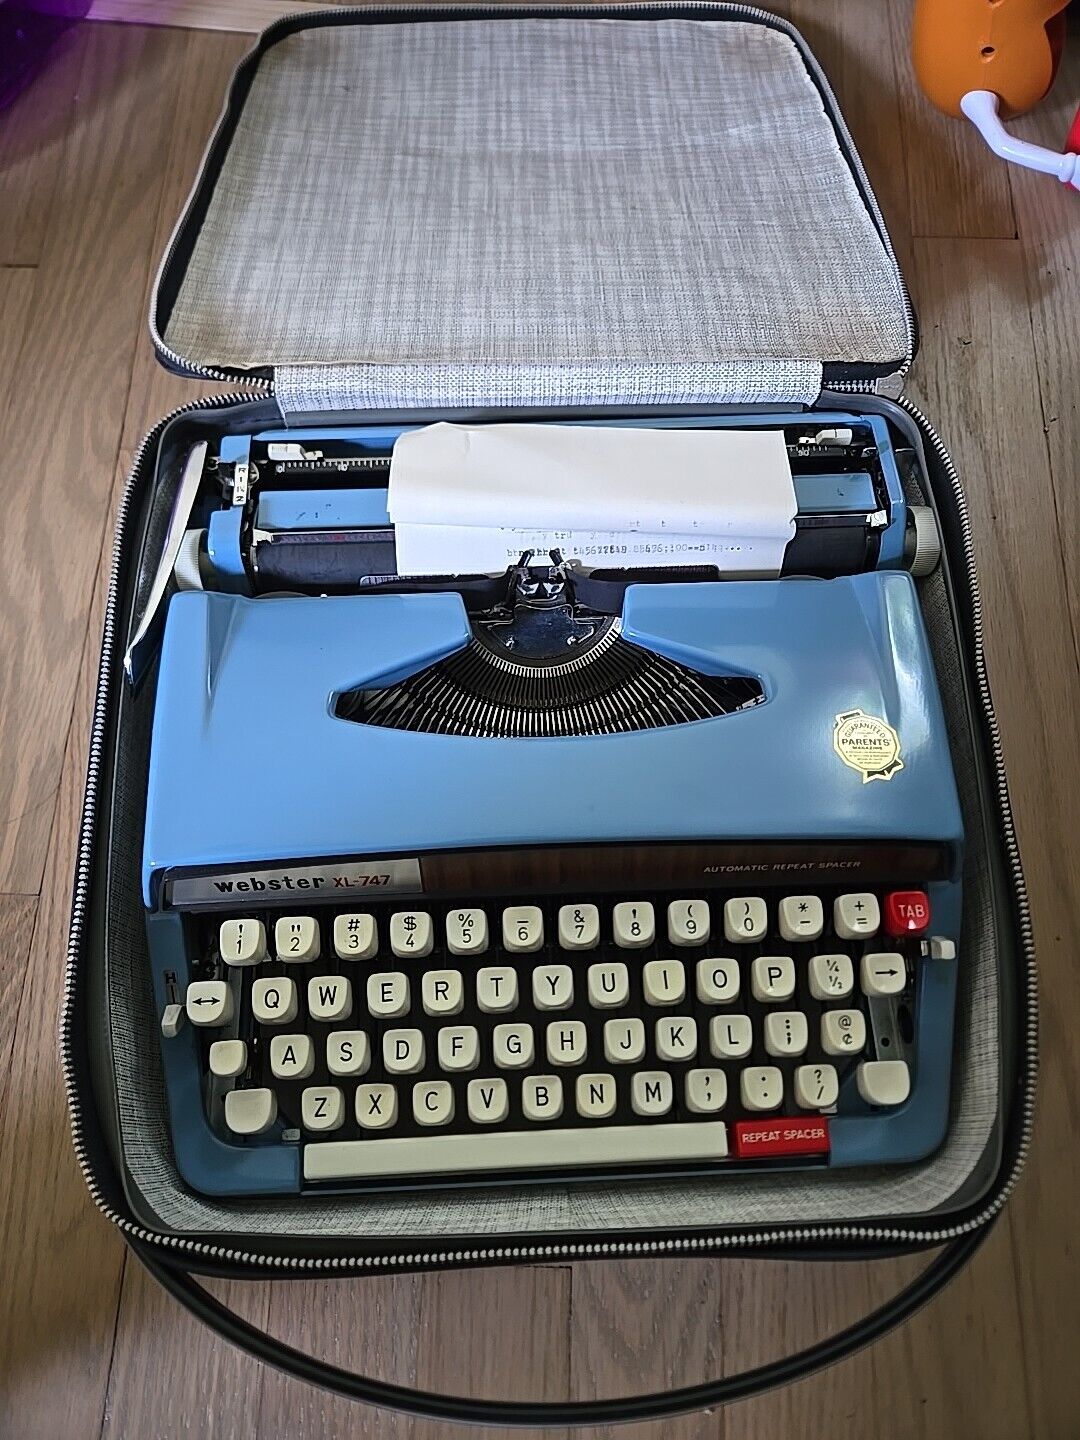 1970s Brother Webster XL-747 Portable Typewriter Vintage Blue W/Case & Papers